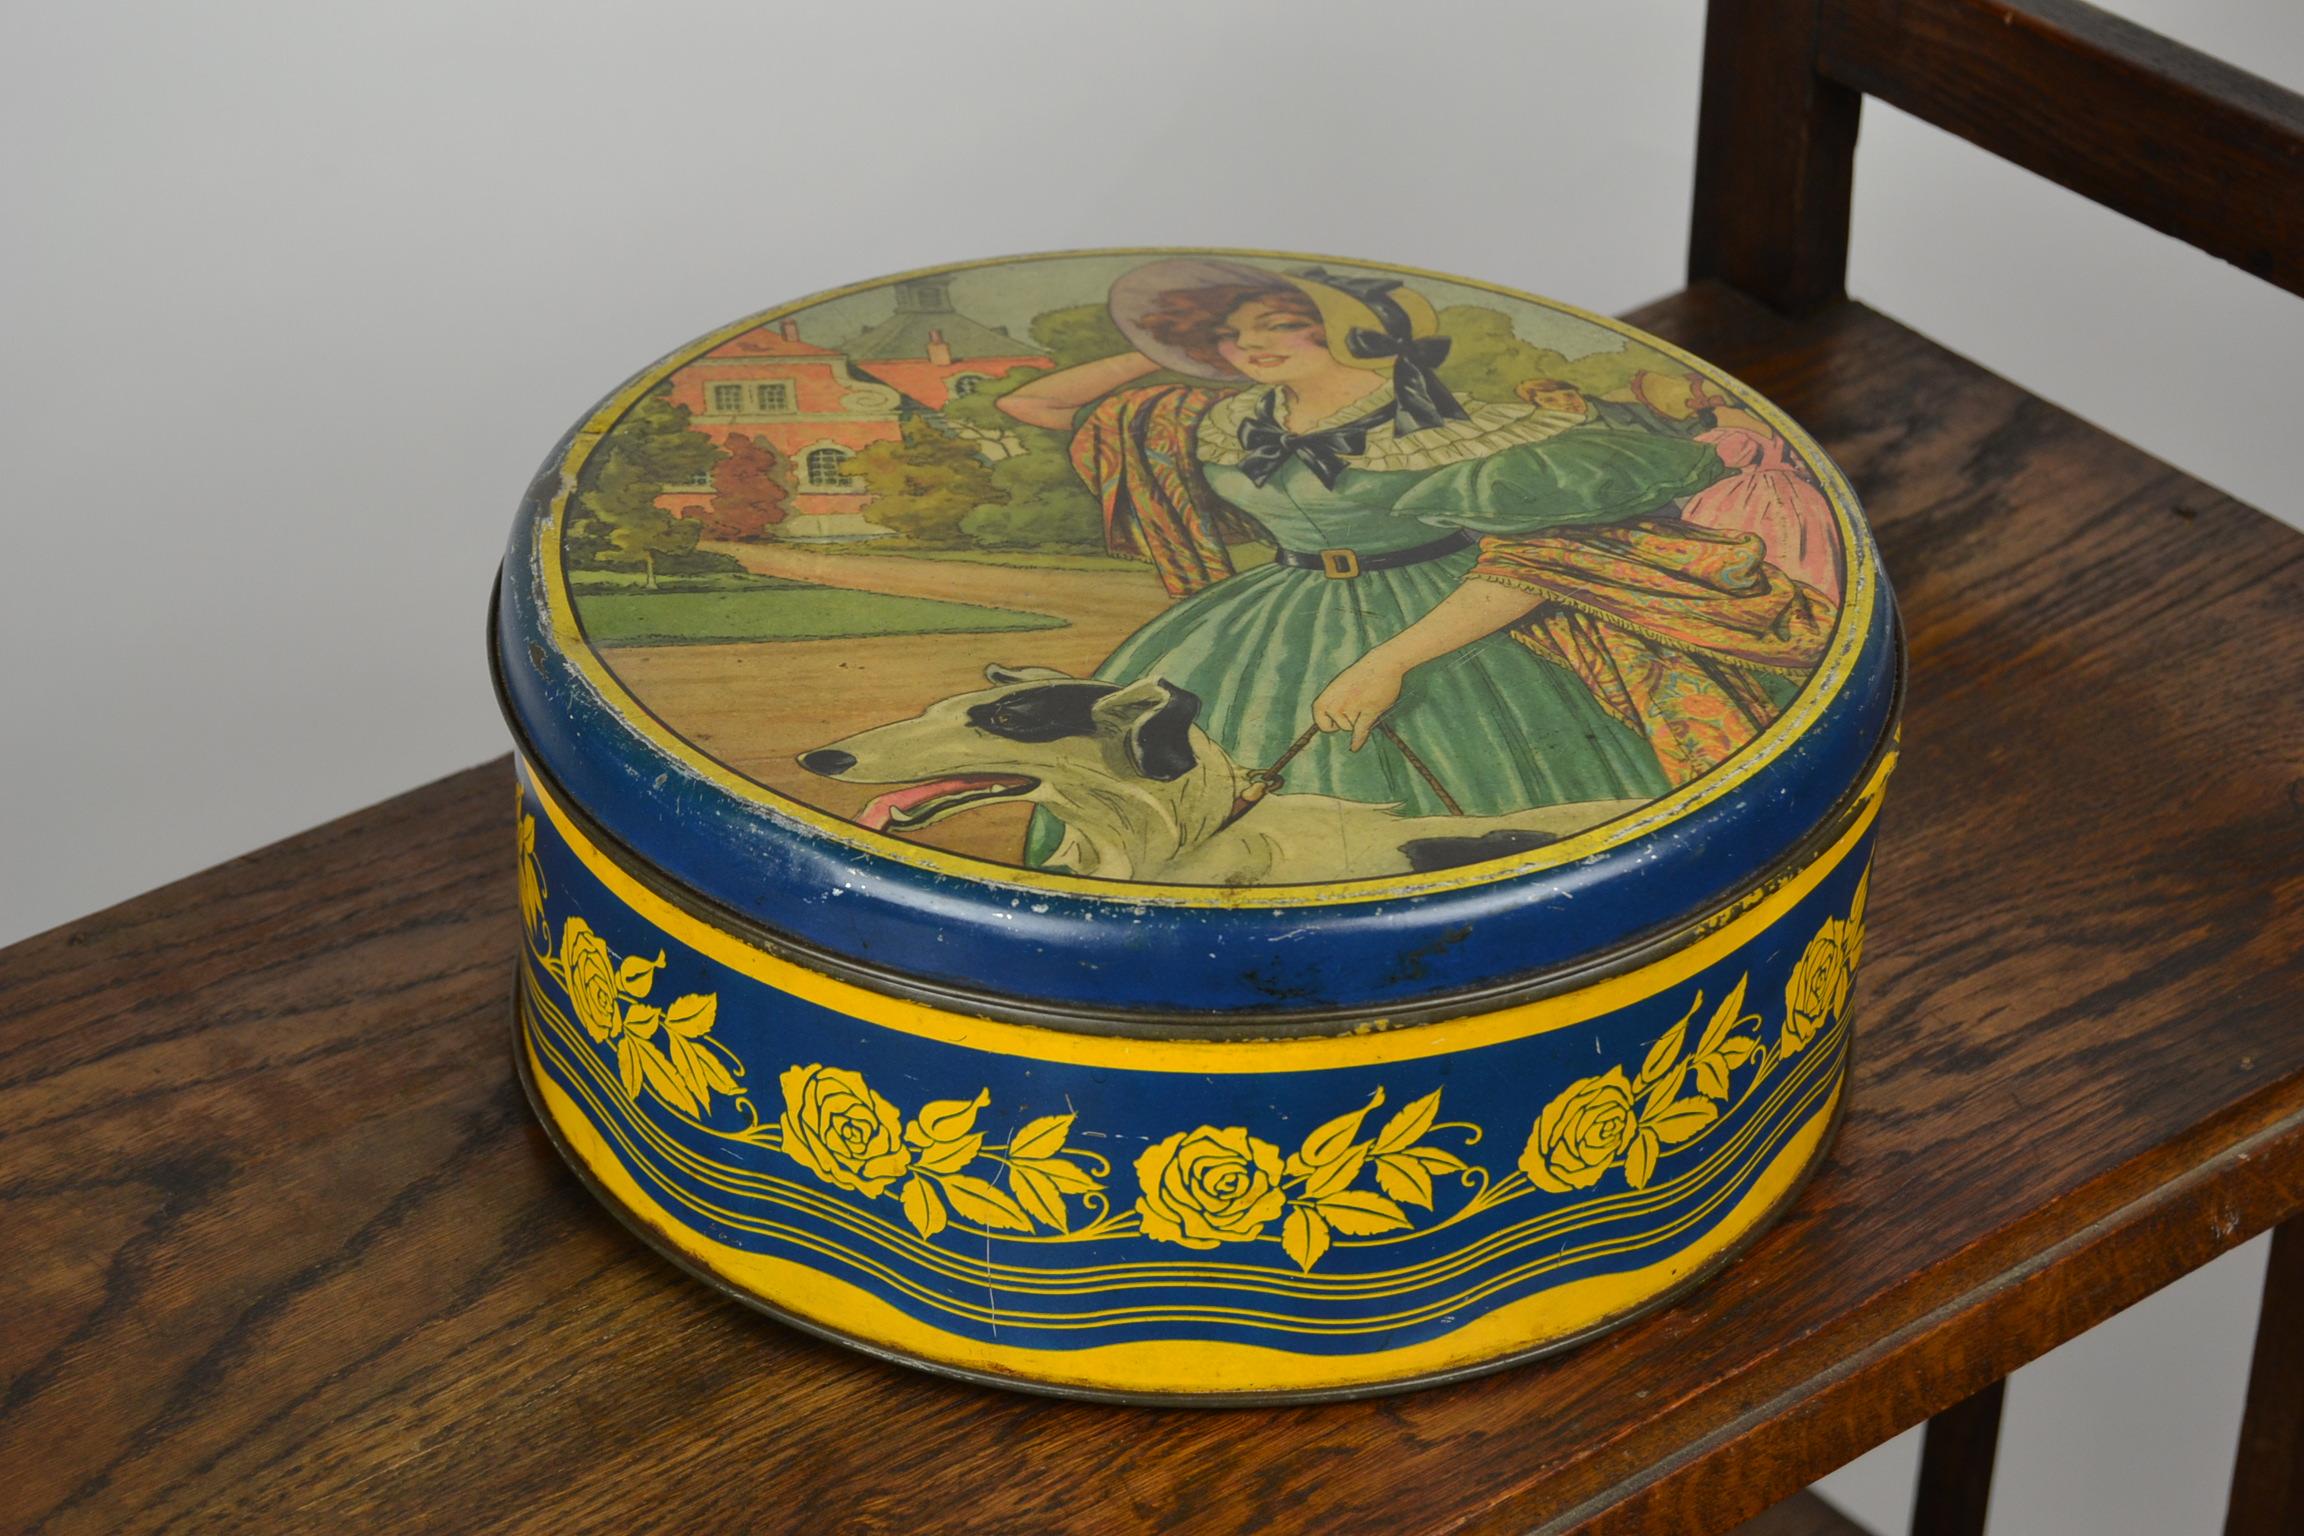 Biscuit Tin Box with Lady and Greyhound Dod, Art Deco Period 2